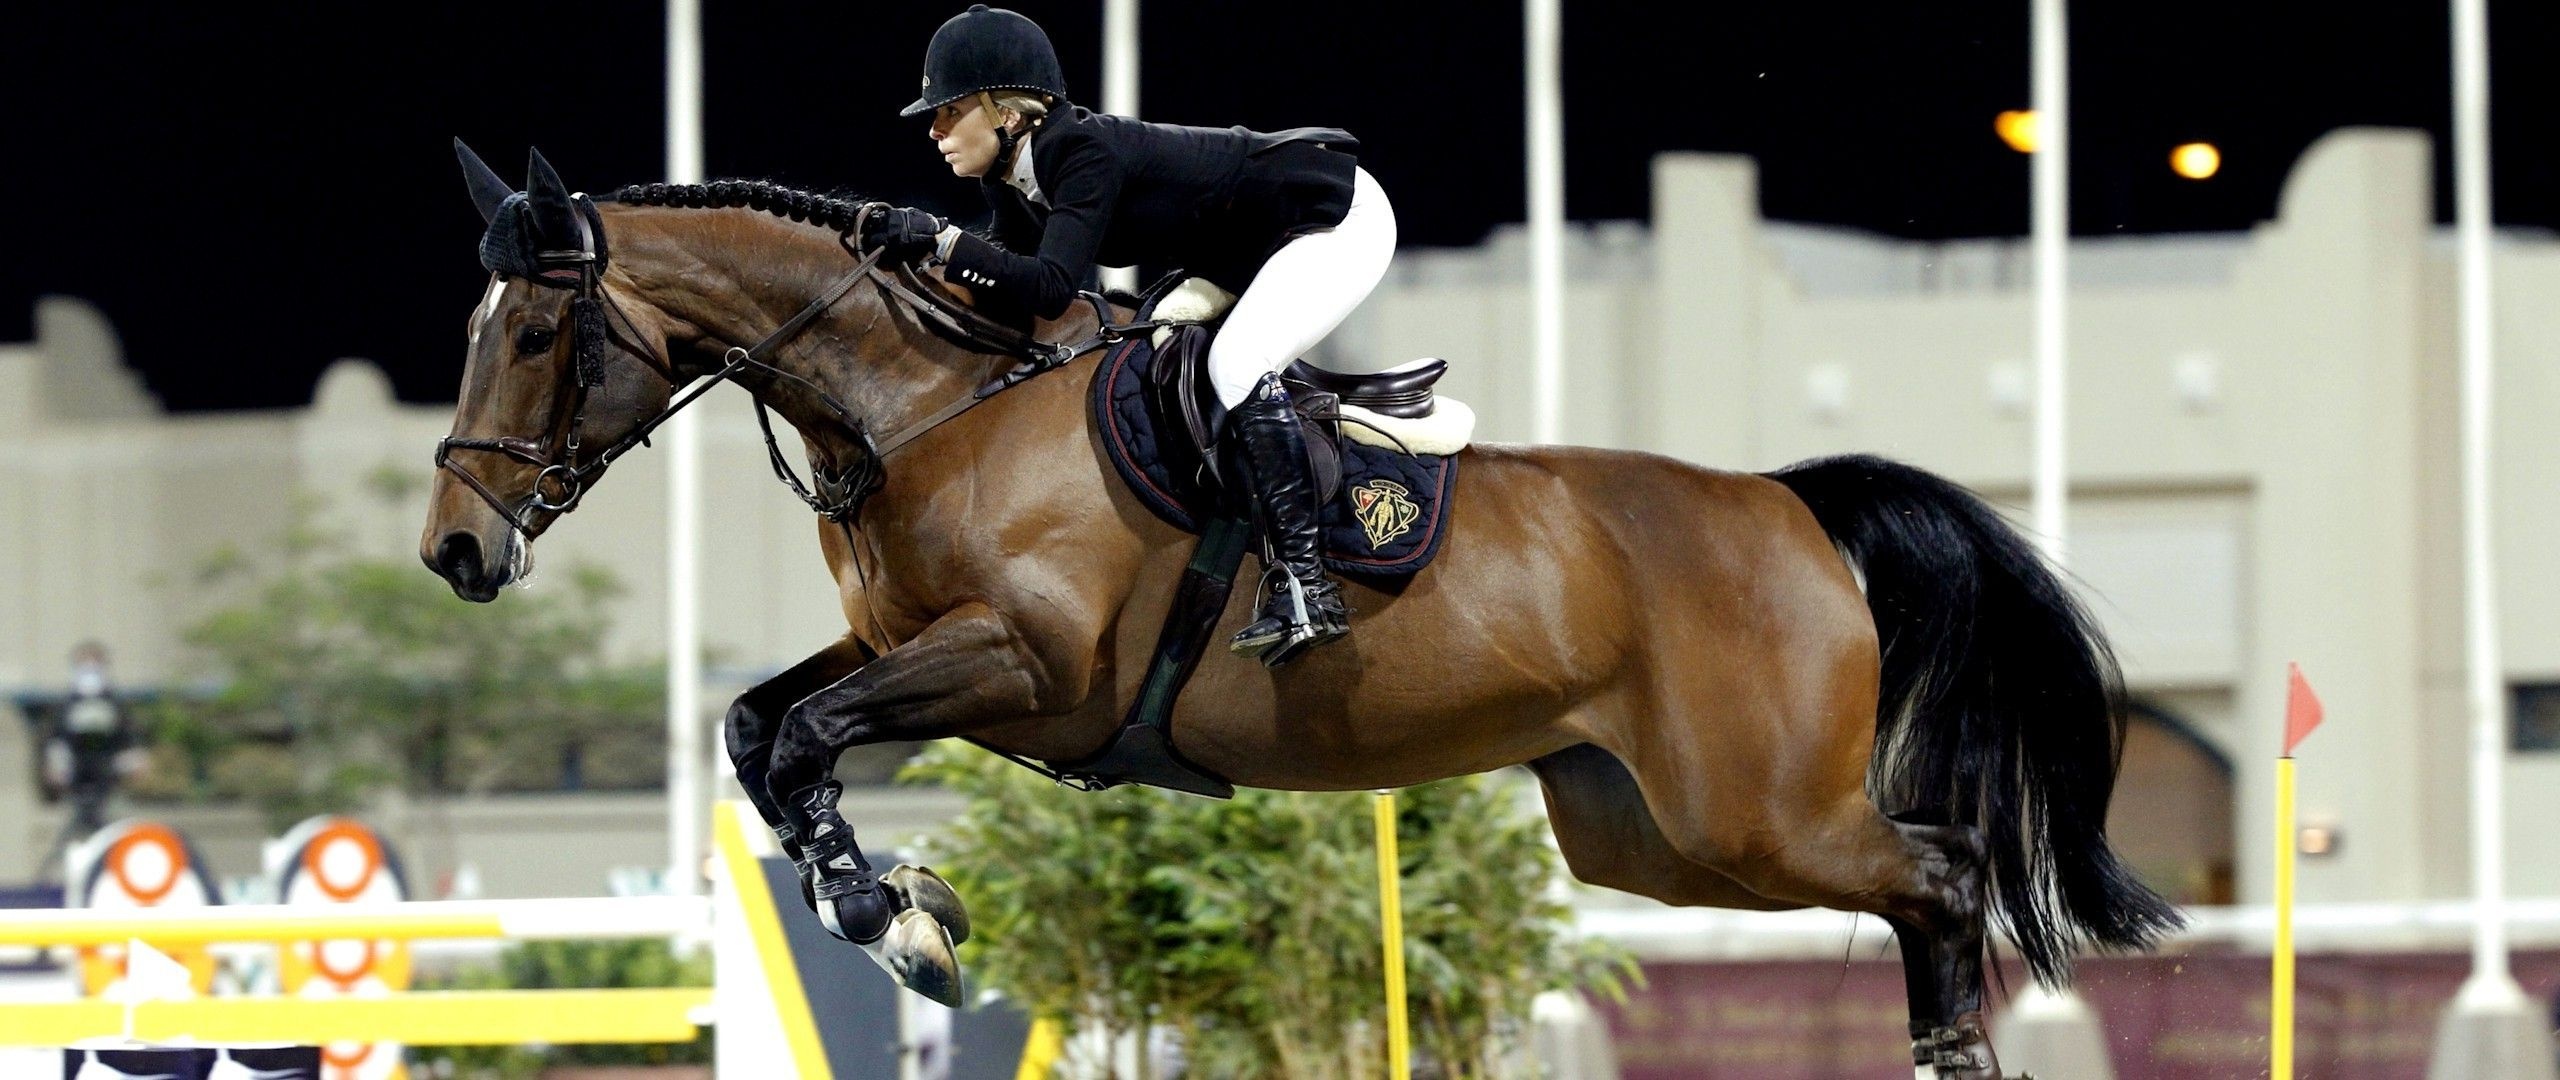 Eventing: Show jumping, A part of a group of English horse riding events that also includes dressage, hunters, and equitation. 2560x1080 Dual Screen Background.